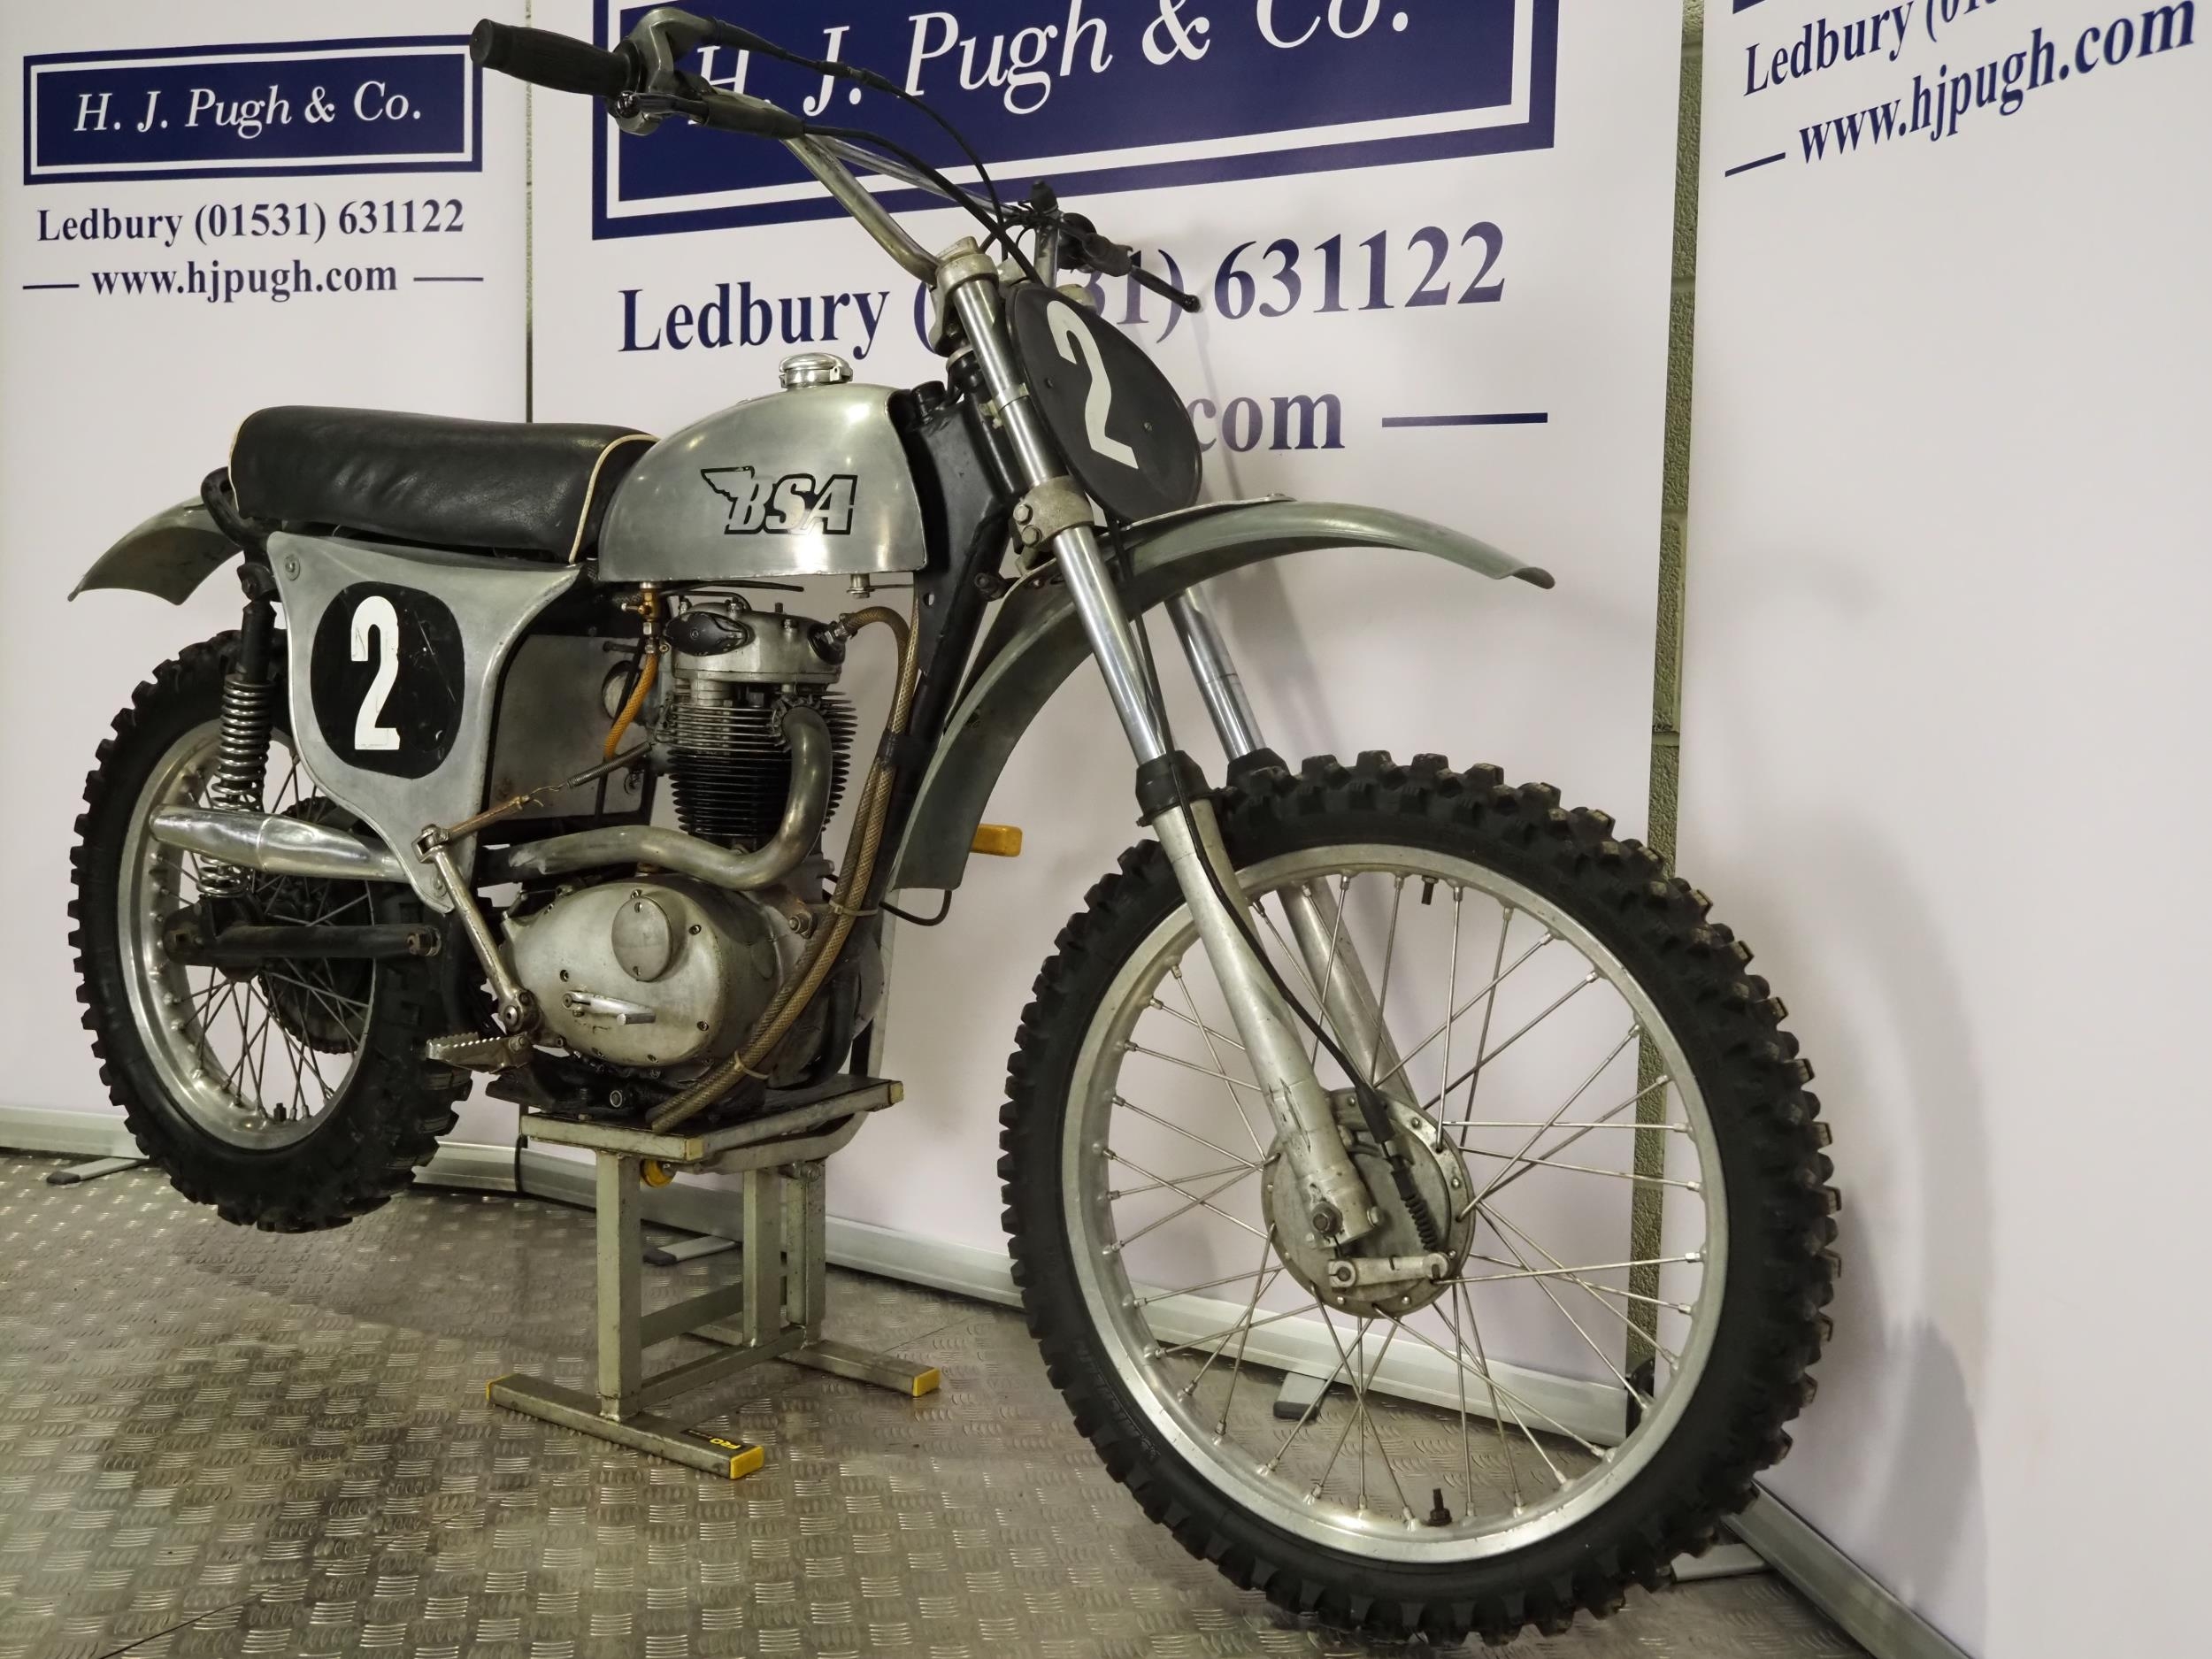 BSA Walker Victor trials motorcycle. 441cc Engine turns over. Has been dry stored for many years. - Image 2 of 7